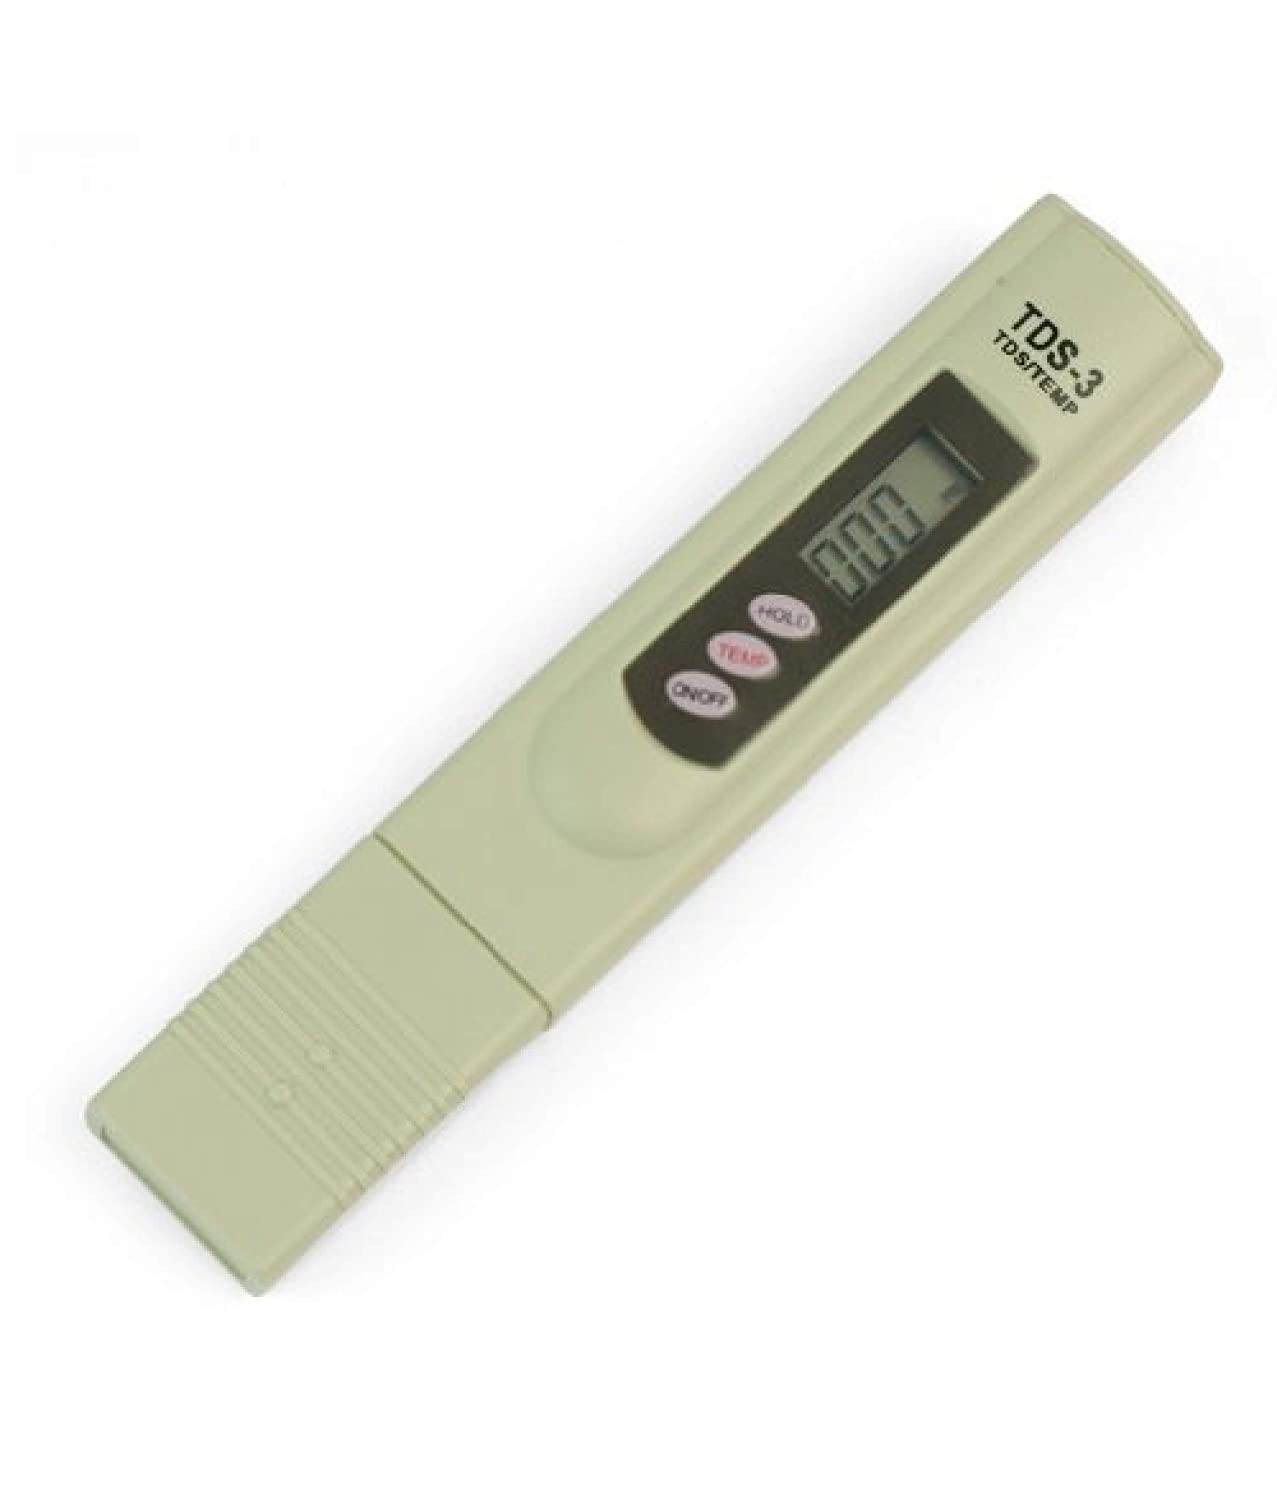 Ekavir TDS Water Tester Meter/Water Purity Tester for Measuring TDS3/TEMP/PPM, Multicolor